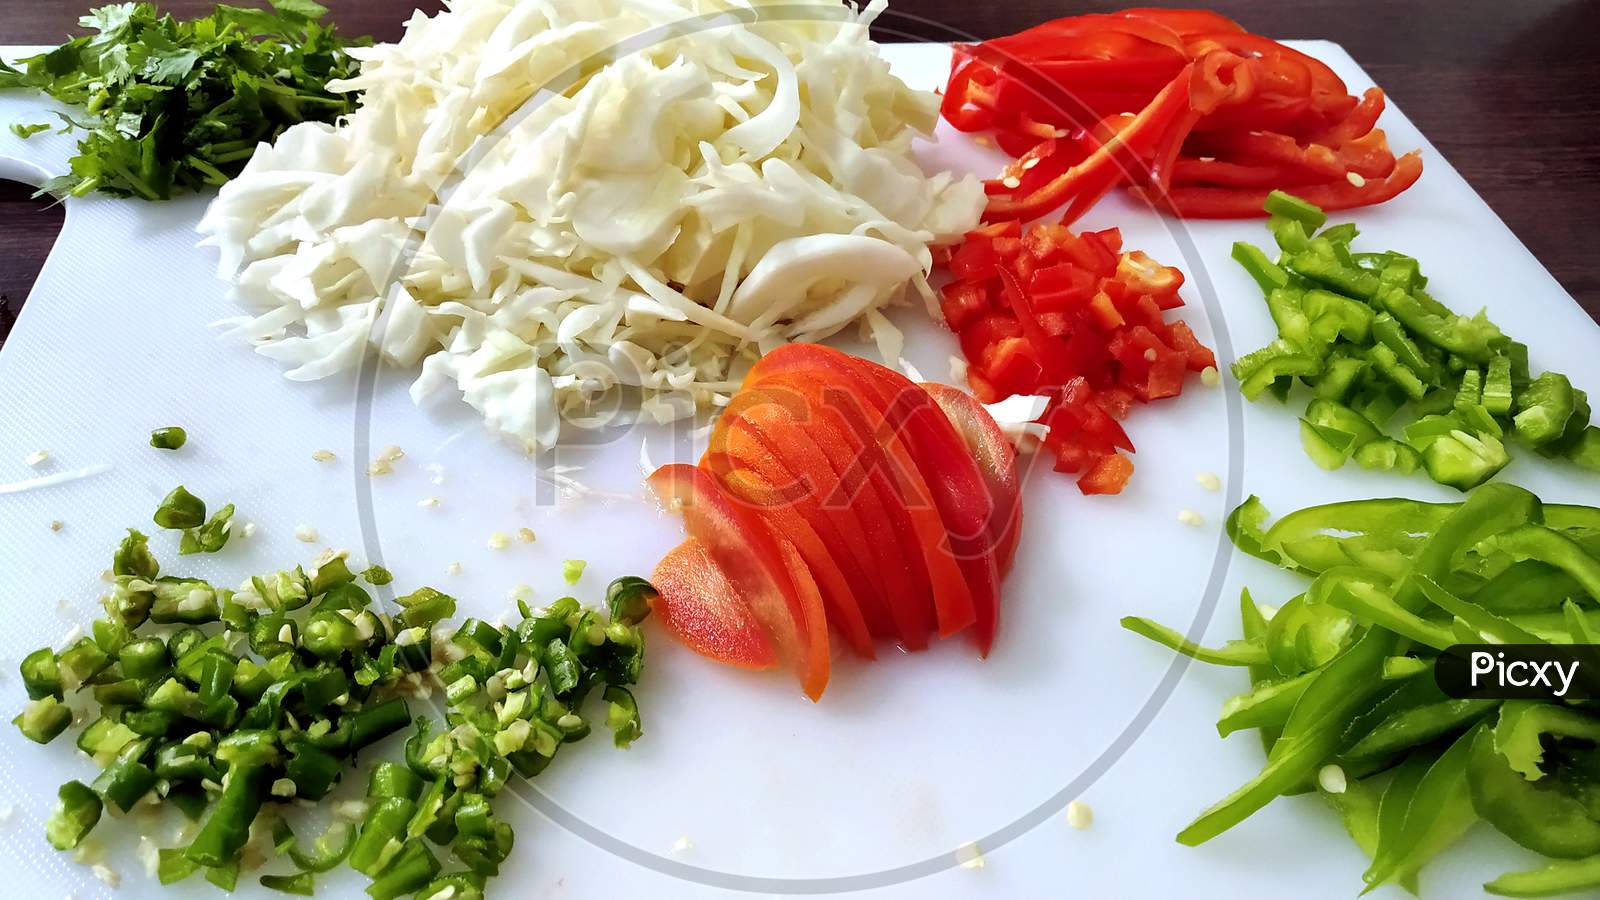 Top View Of Chopped Vegetables On White Chopper